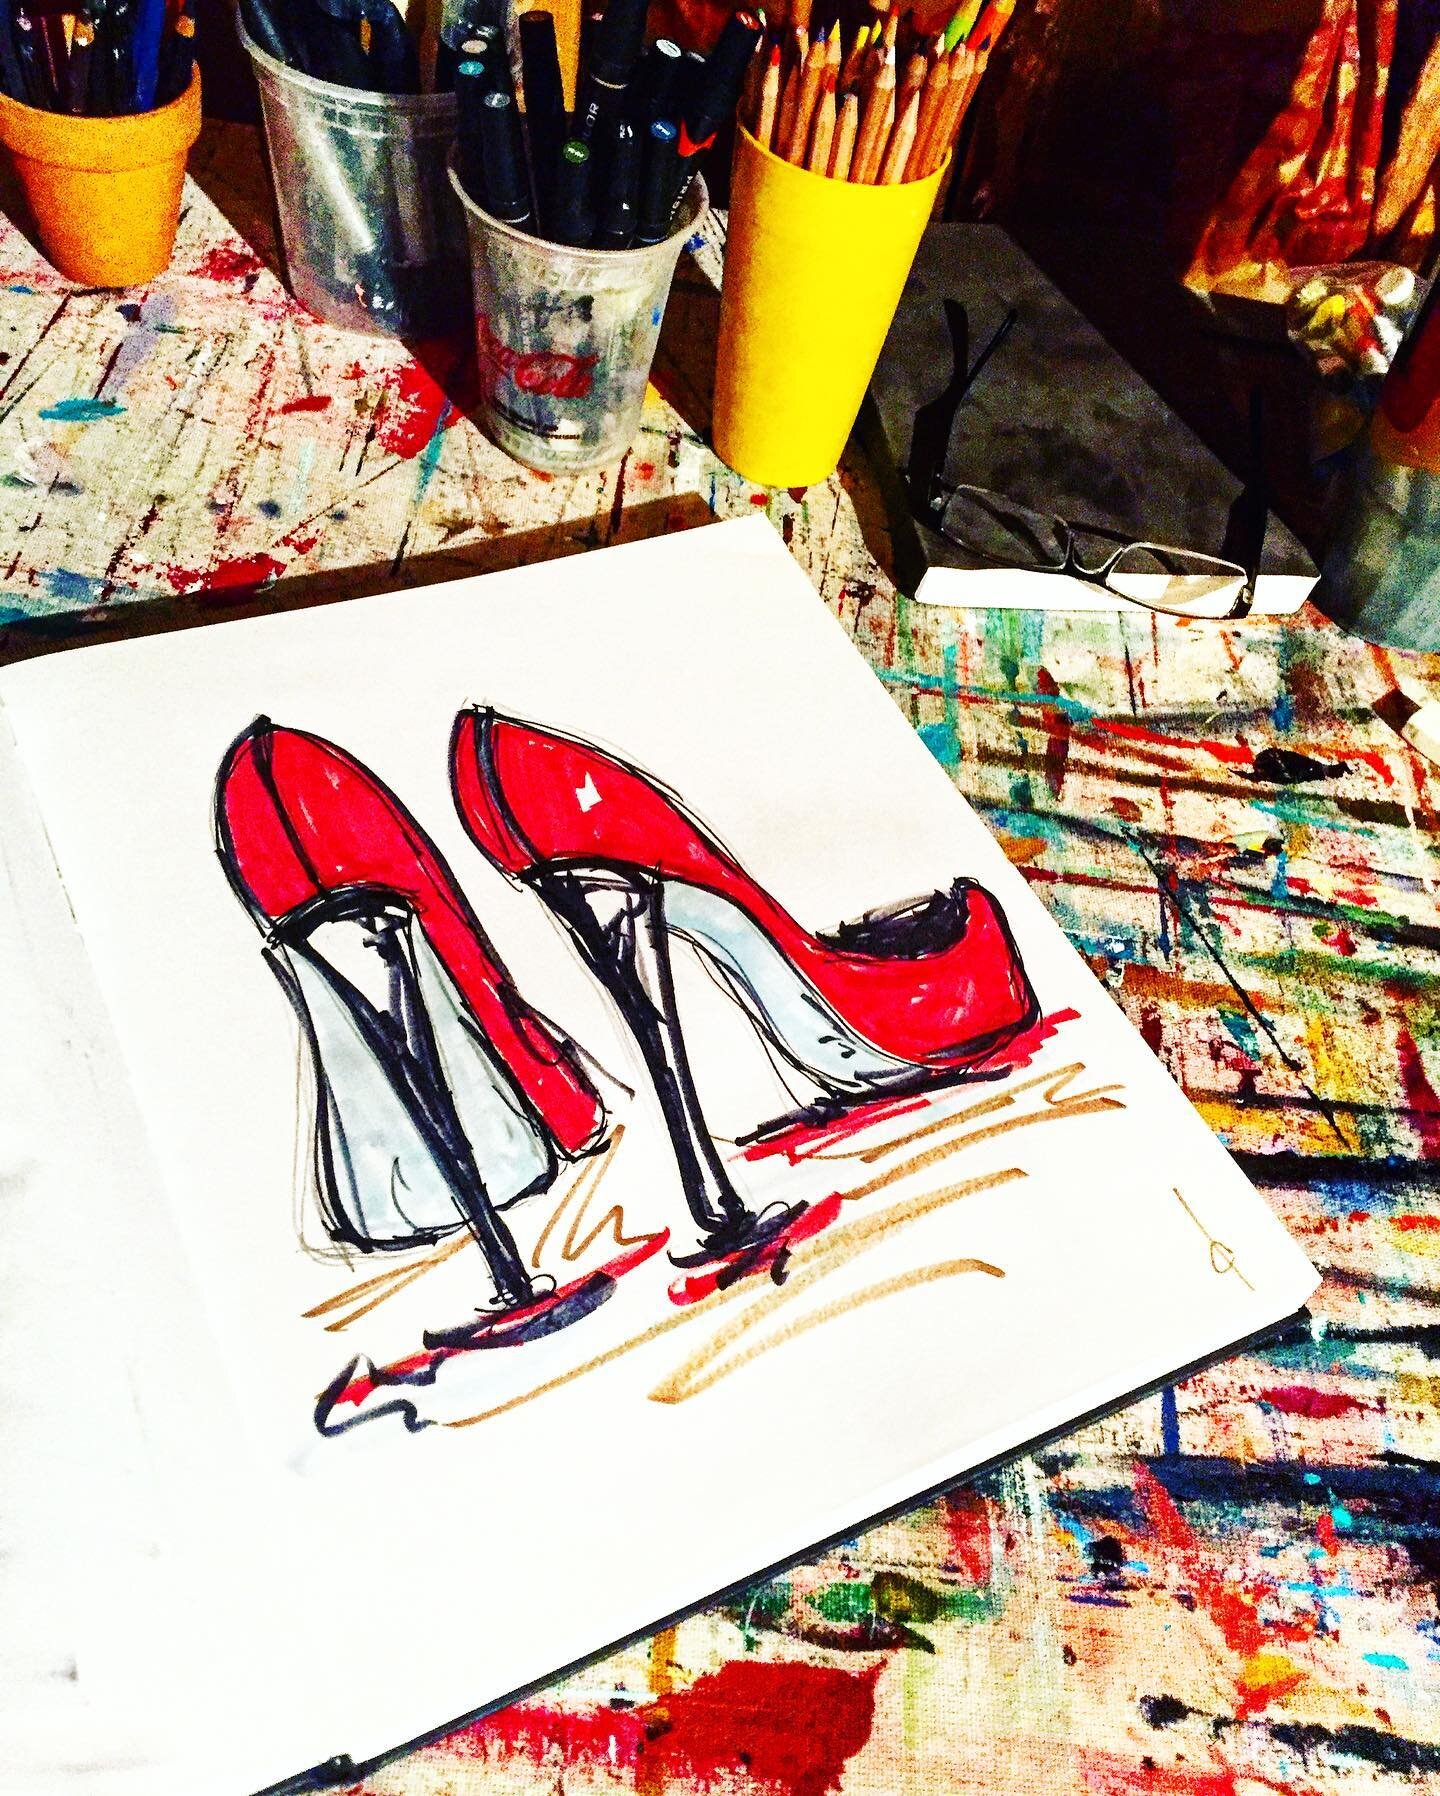 many moons ago was ask to do a few fashion sketches for the client to use&hellip;..

#fashion #fashionstyle #shoes #art #figurativeart #tbt #❤️ #love #artwork #fineart #modernart #contemporaryart #contemporarypainting #instaart #abstractart #streetar